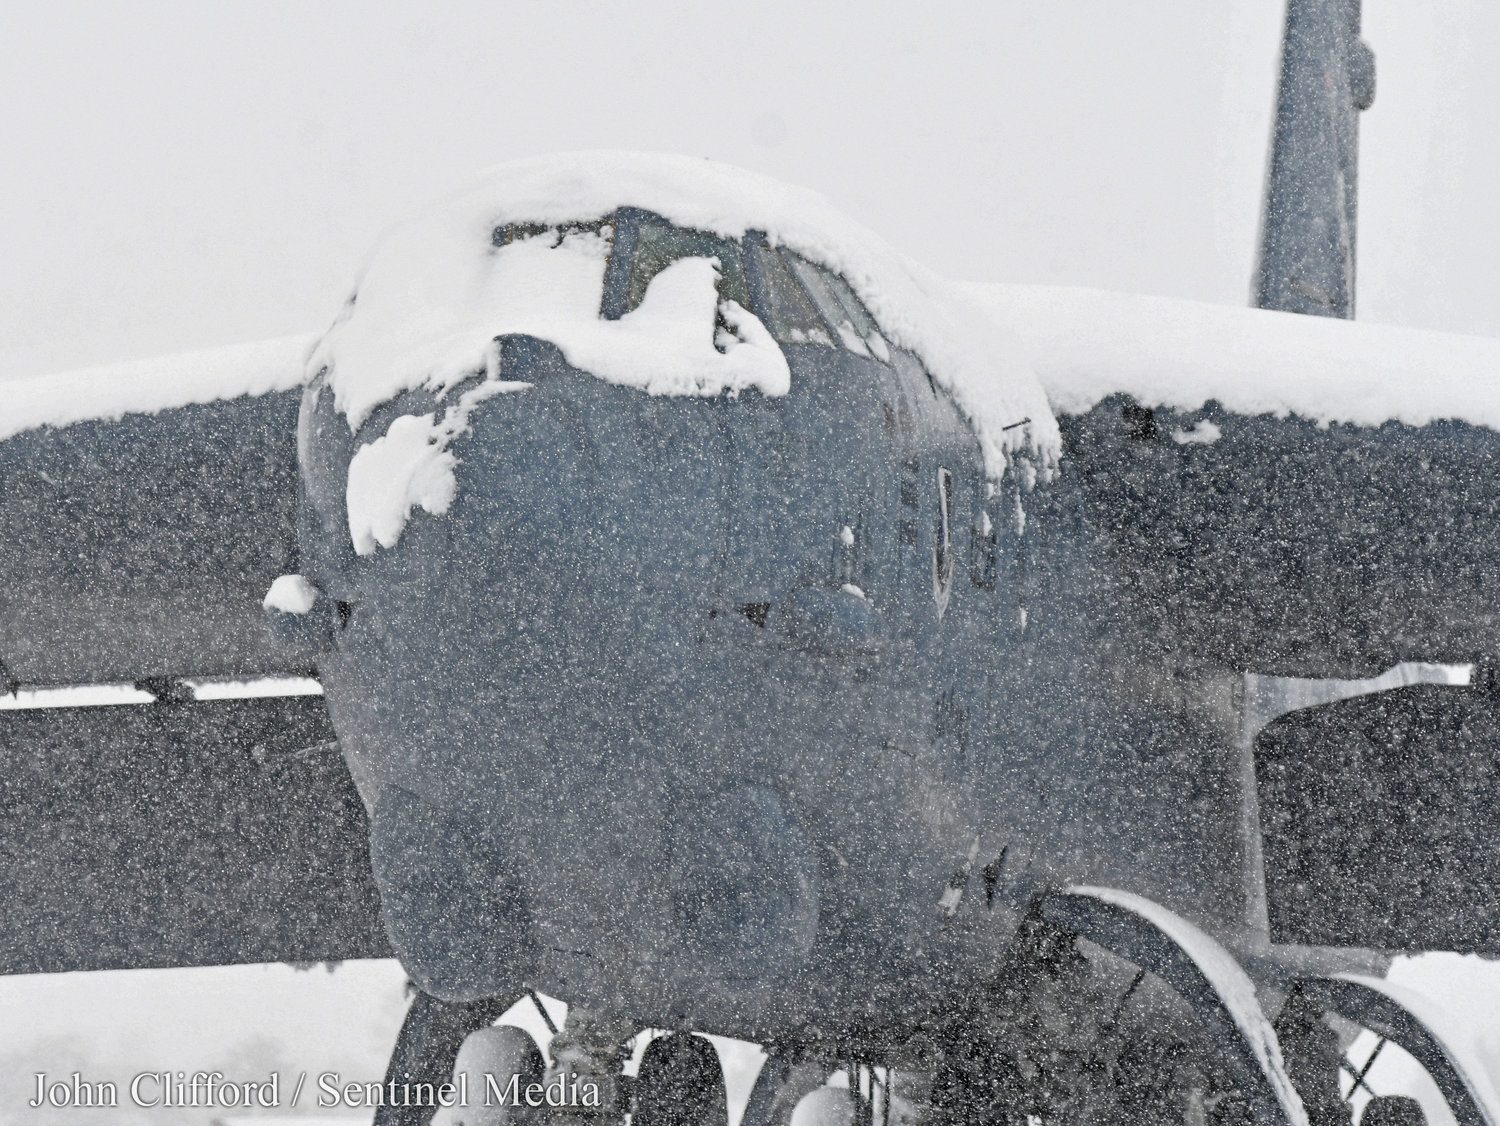 The snow covered static B-52 covered in snow Tuesday, March 14, 2023.